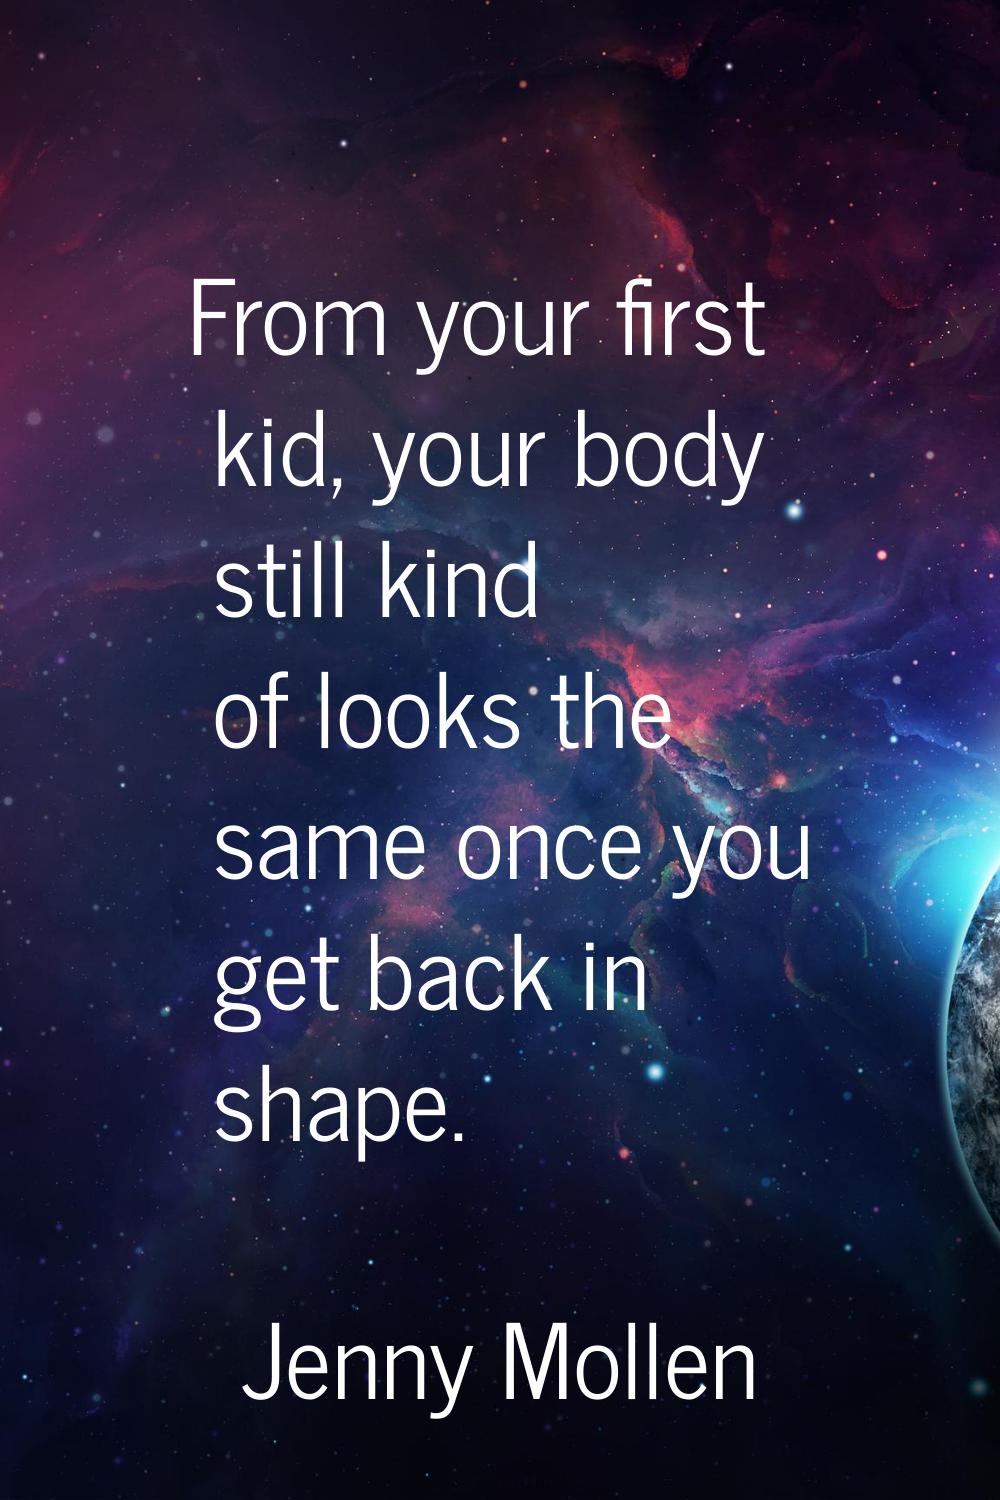 From your first kid, your body still kind of looks the same once you get back in shape.